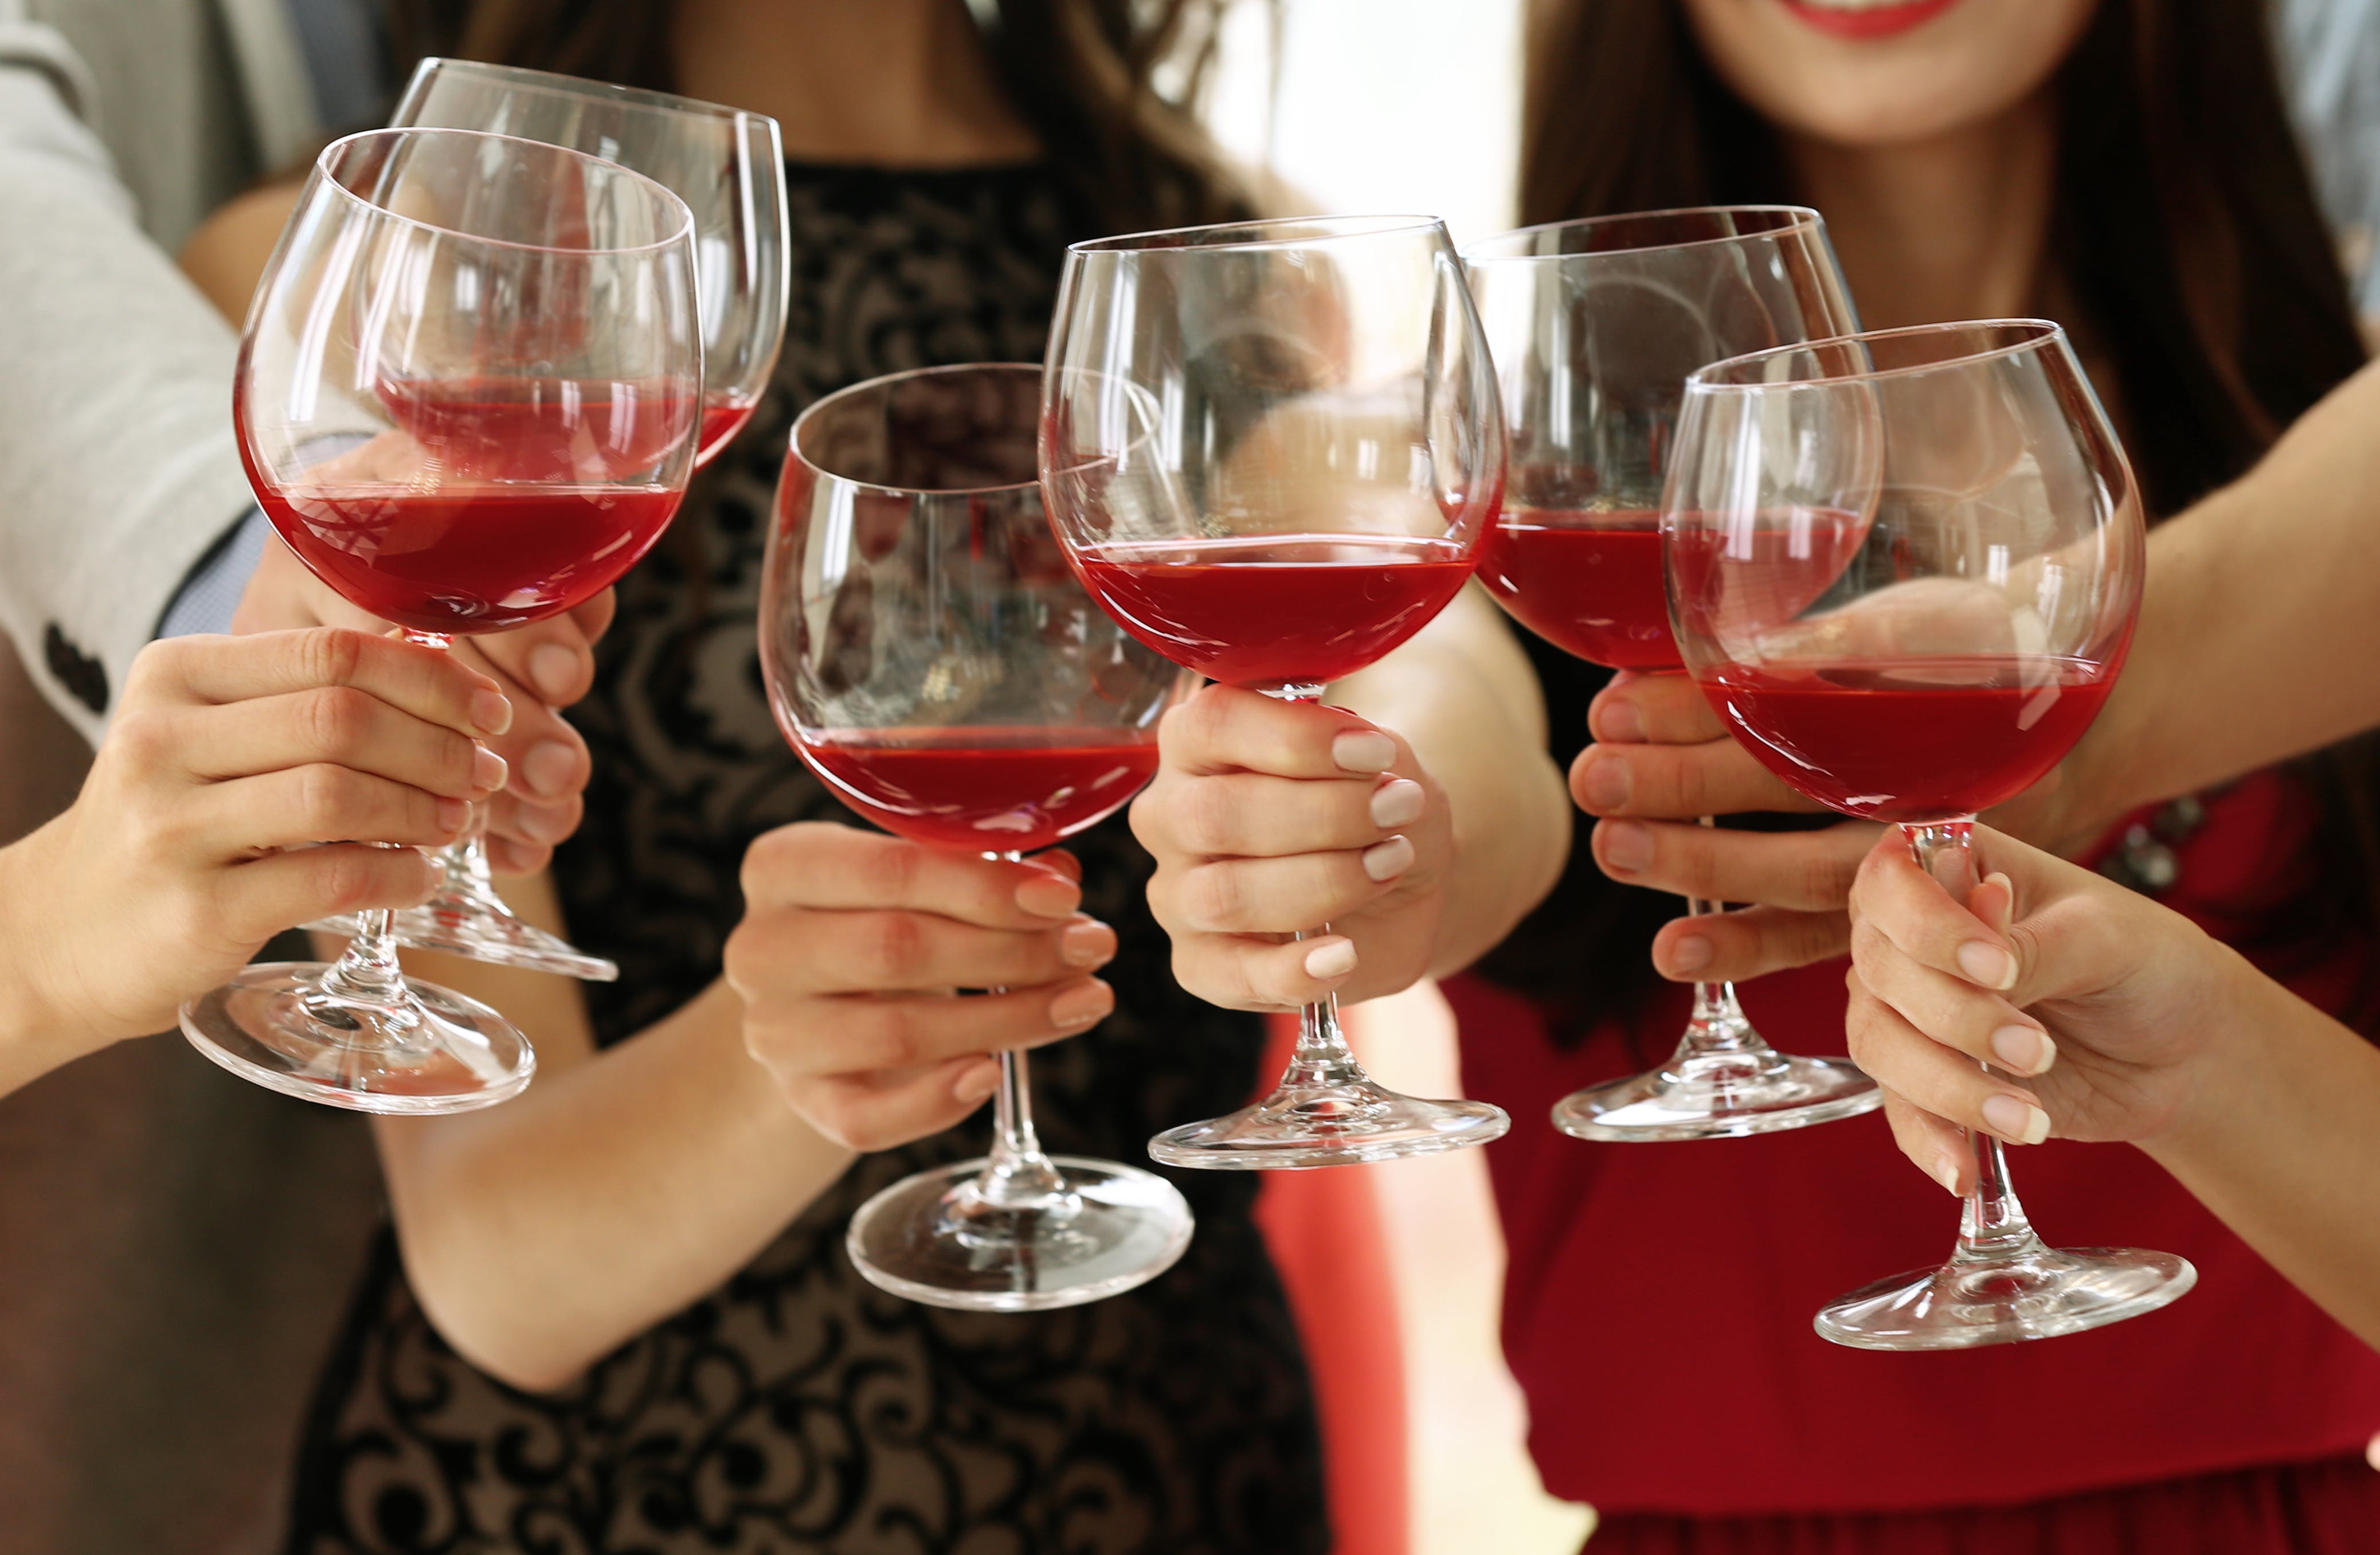 Cheers with wine glasses